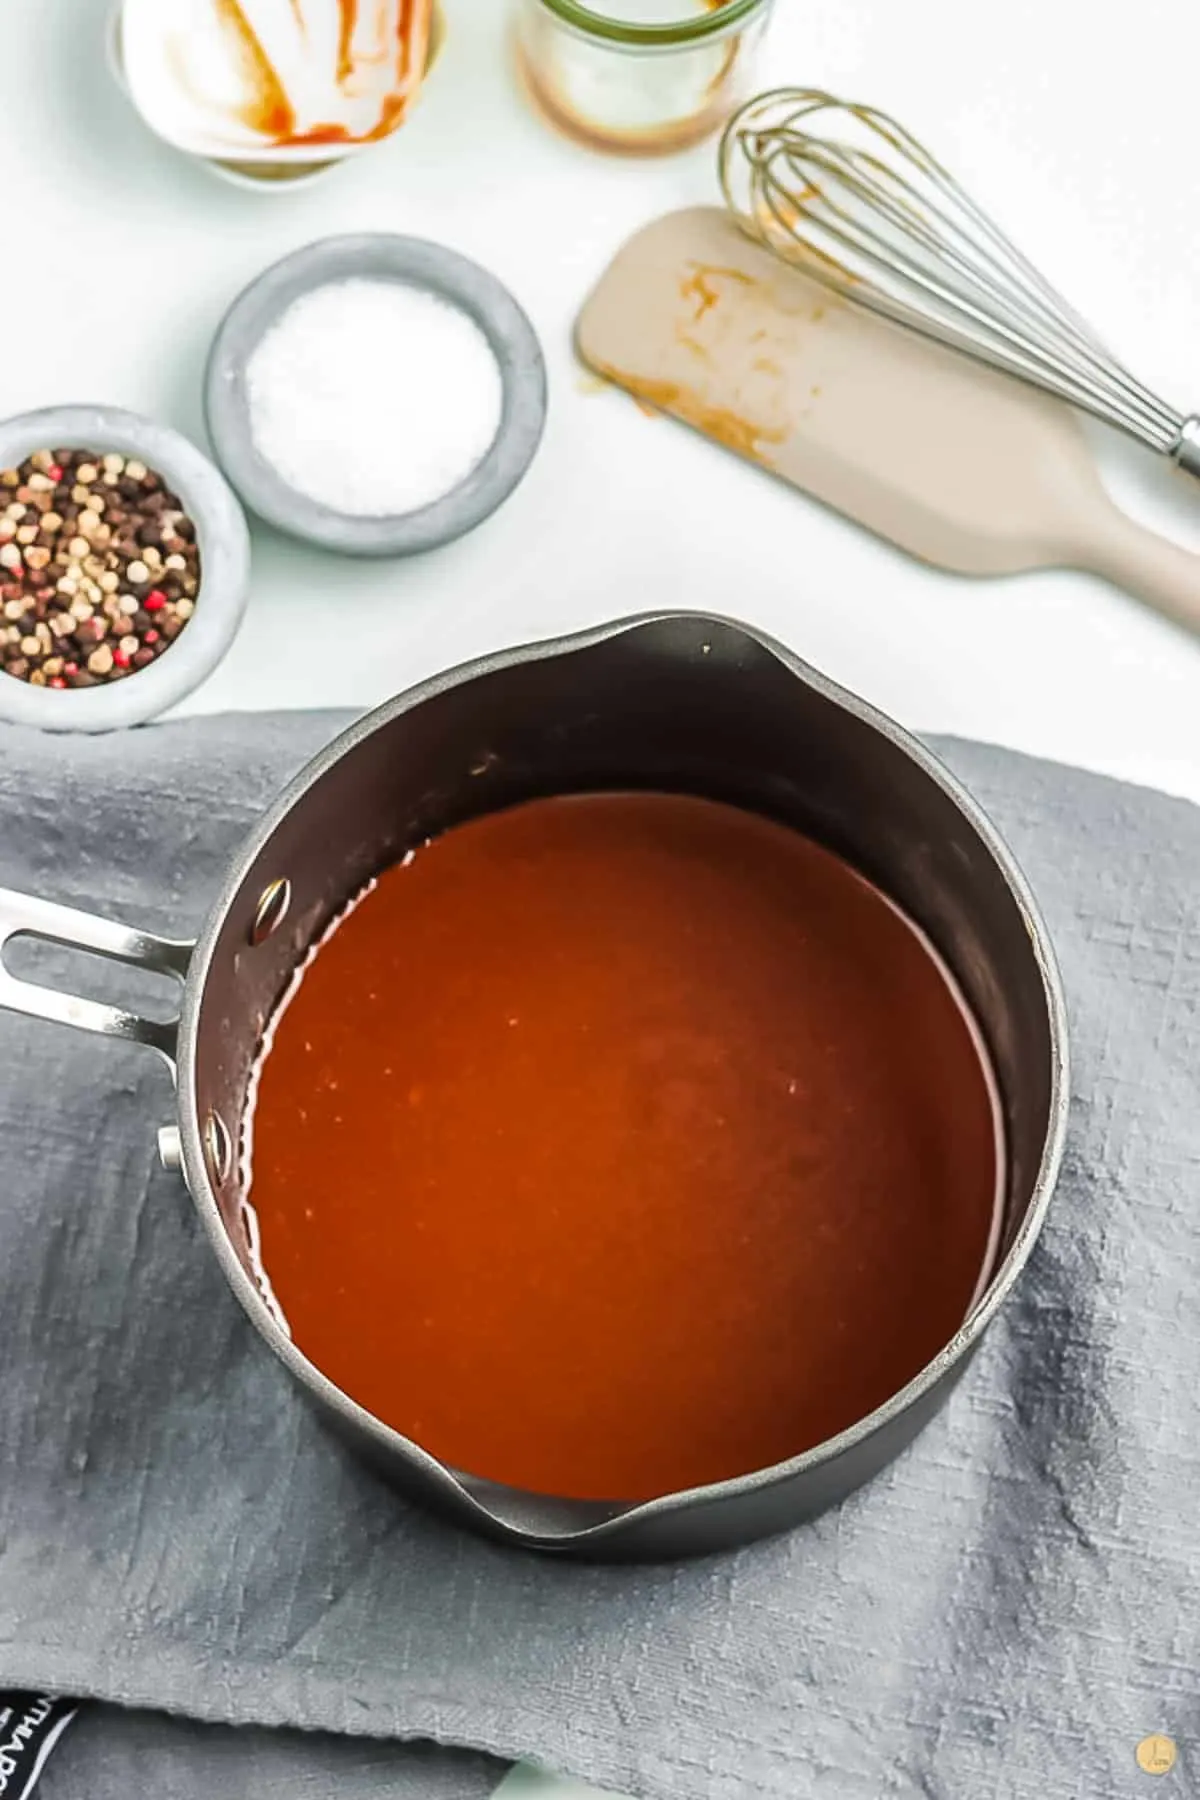 hoisin sauce is perfect for any asian dishes and chinese cooking